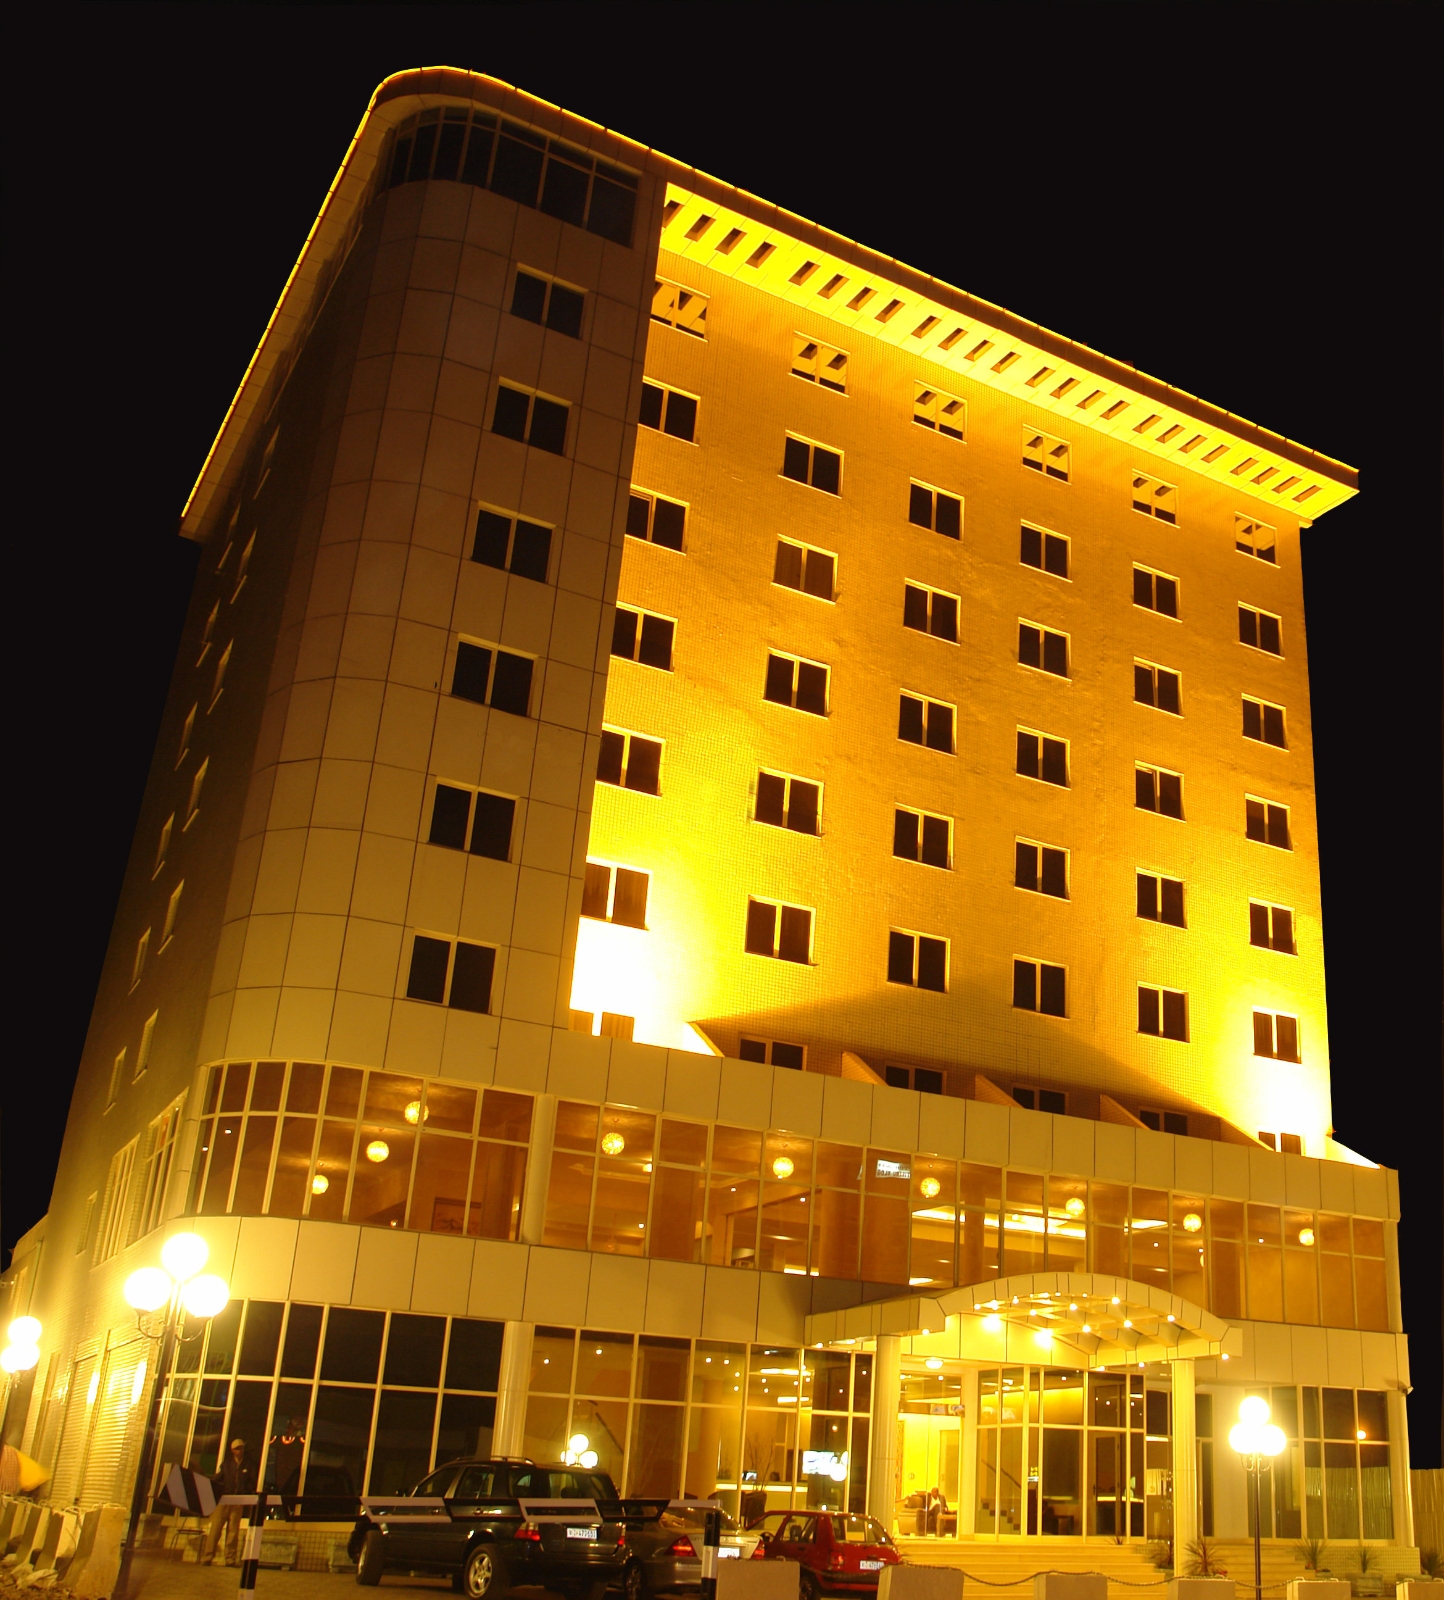 Hotel In Addis Ababa Dreamliner Hotel - Addis Ababa - Great prices at HOTEL INFO